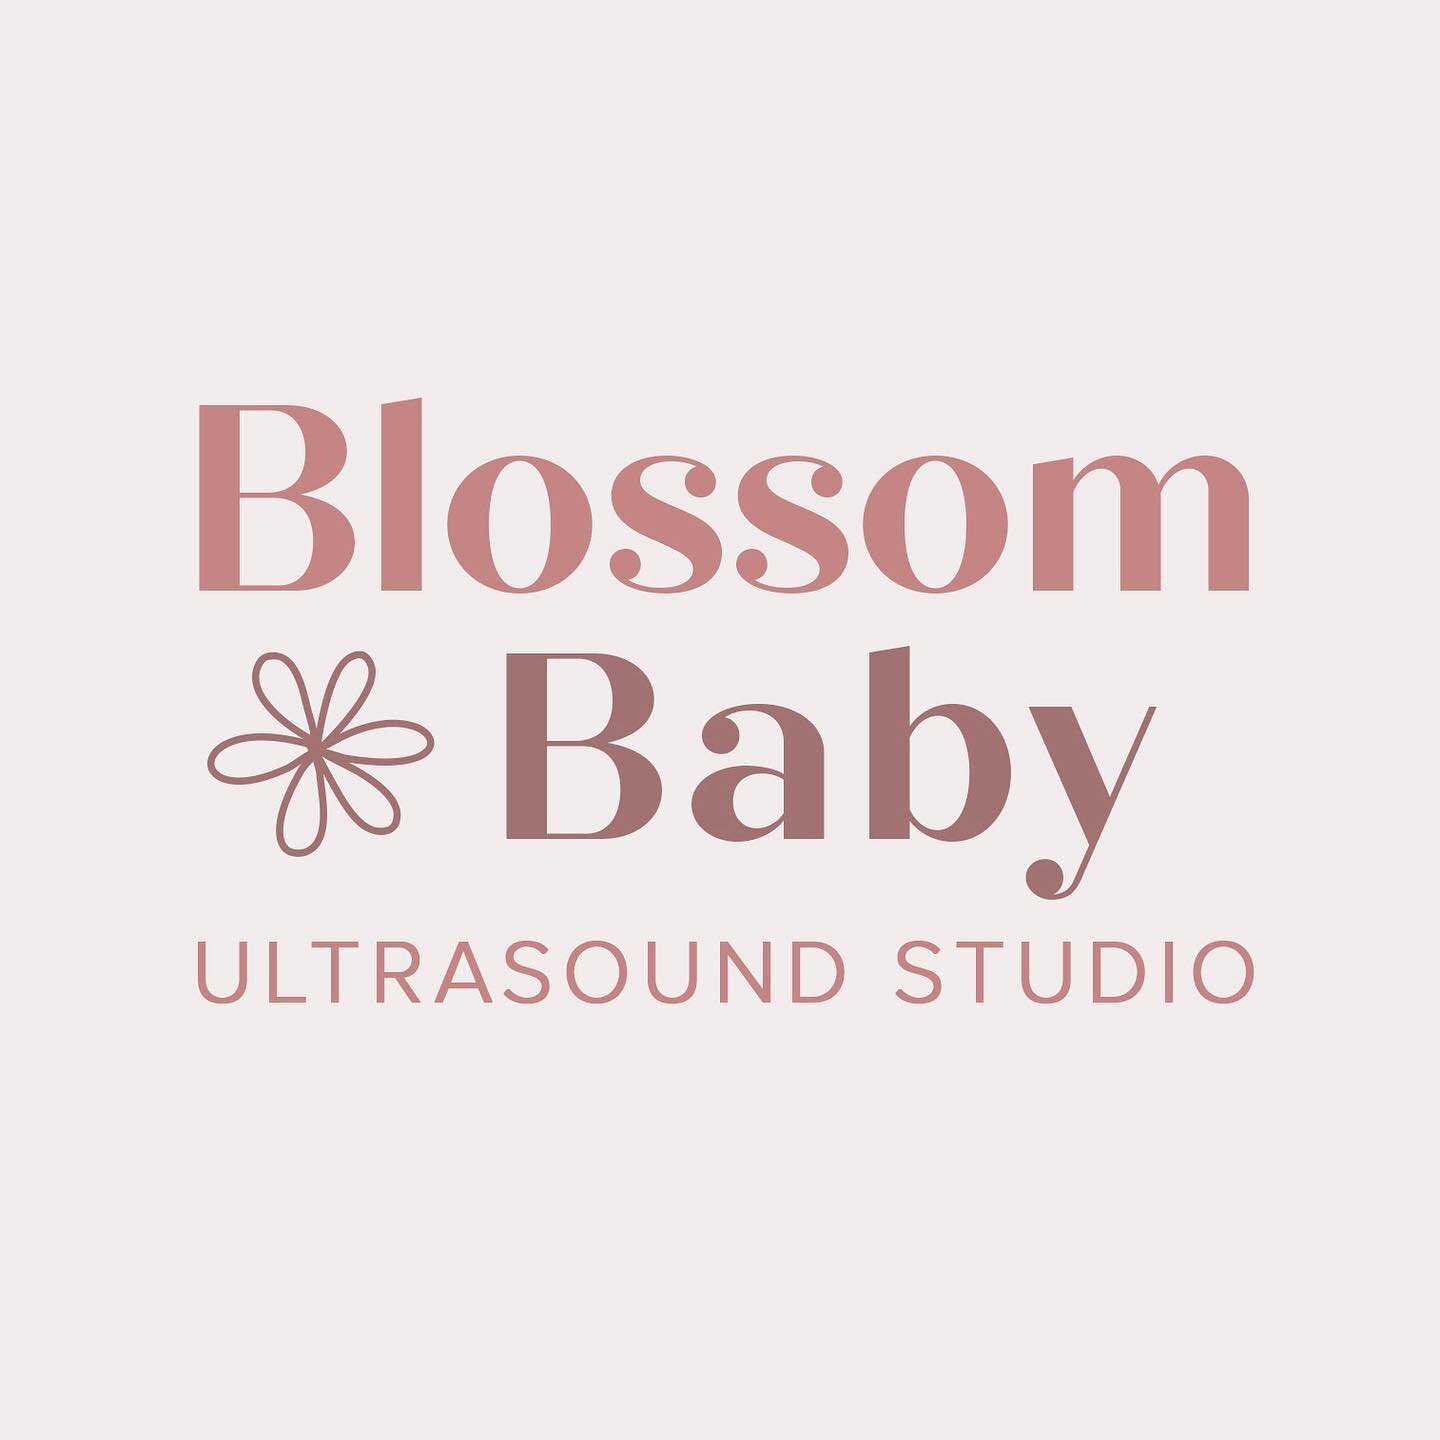 Calling all expecting (or hopefully soon-to-be-expecting) mamas on the Cape + South Shore! Our branding and web design client, @blossombabyultrasound, is now open for business 🎉

We had so much fun working with Brianna, the owner of Blossom Baby, to